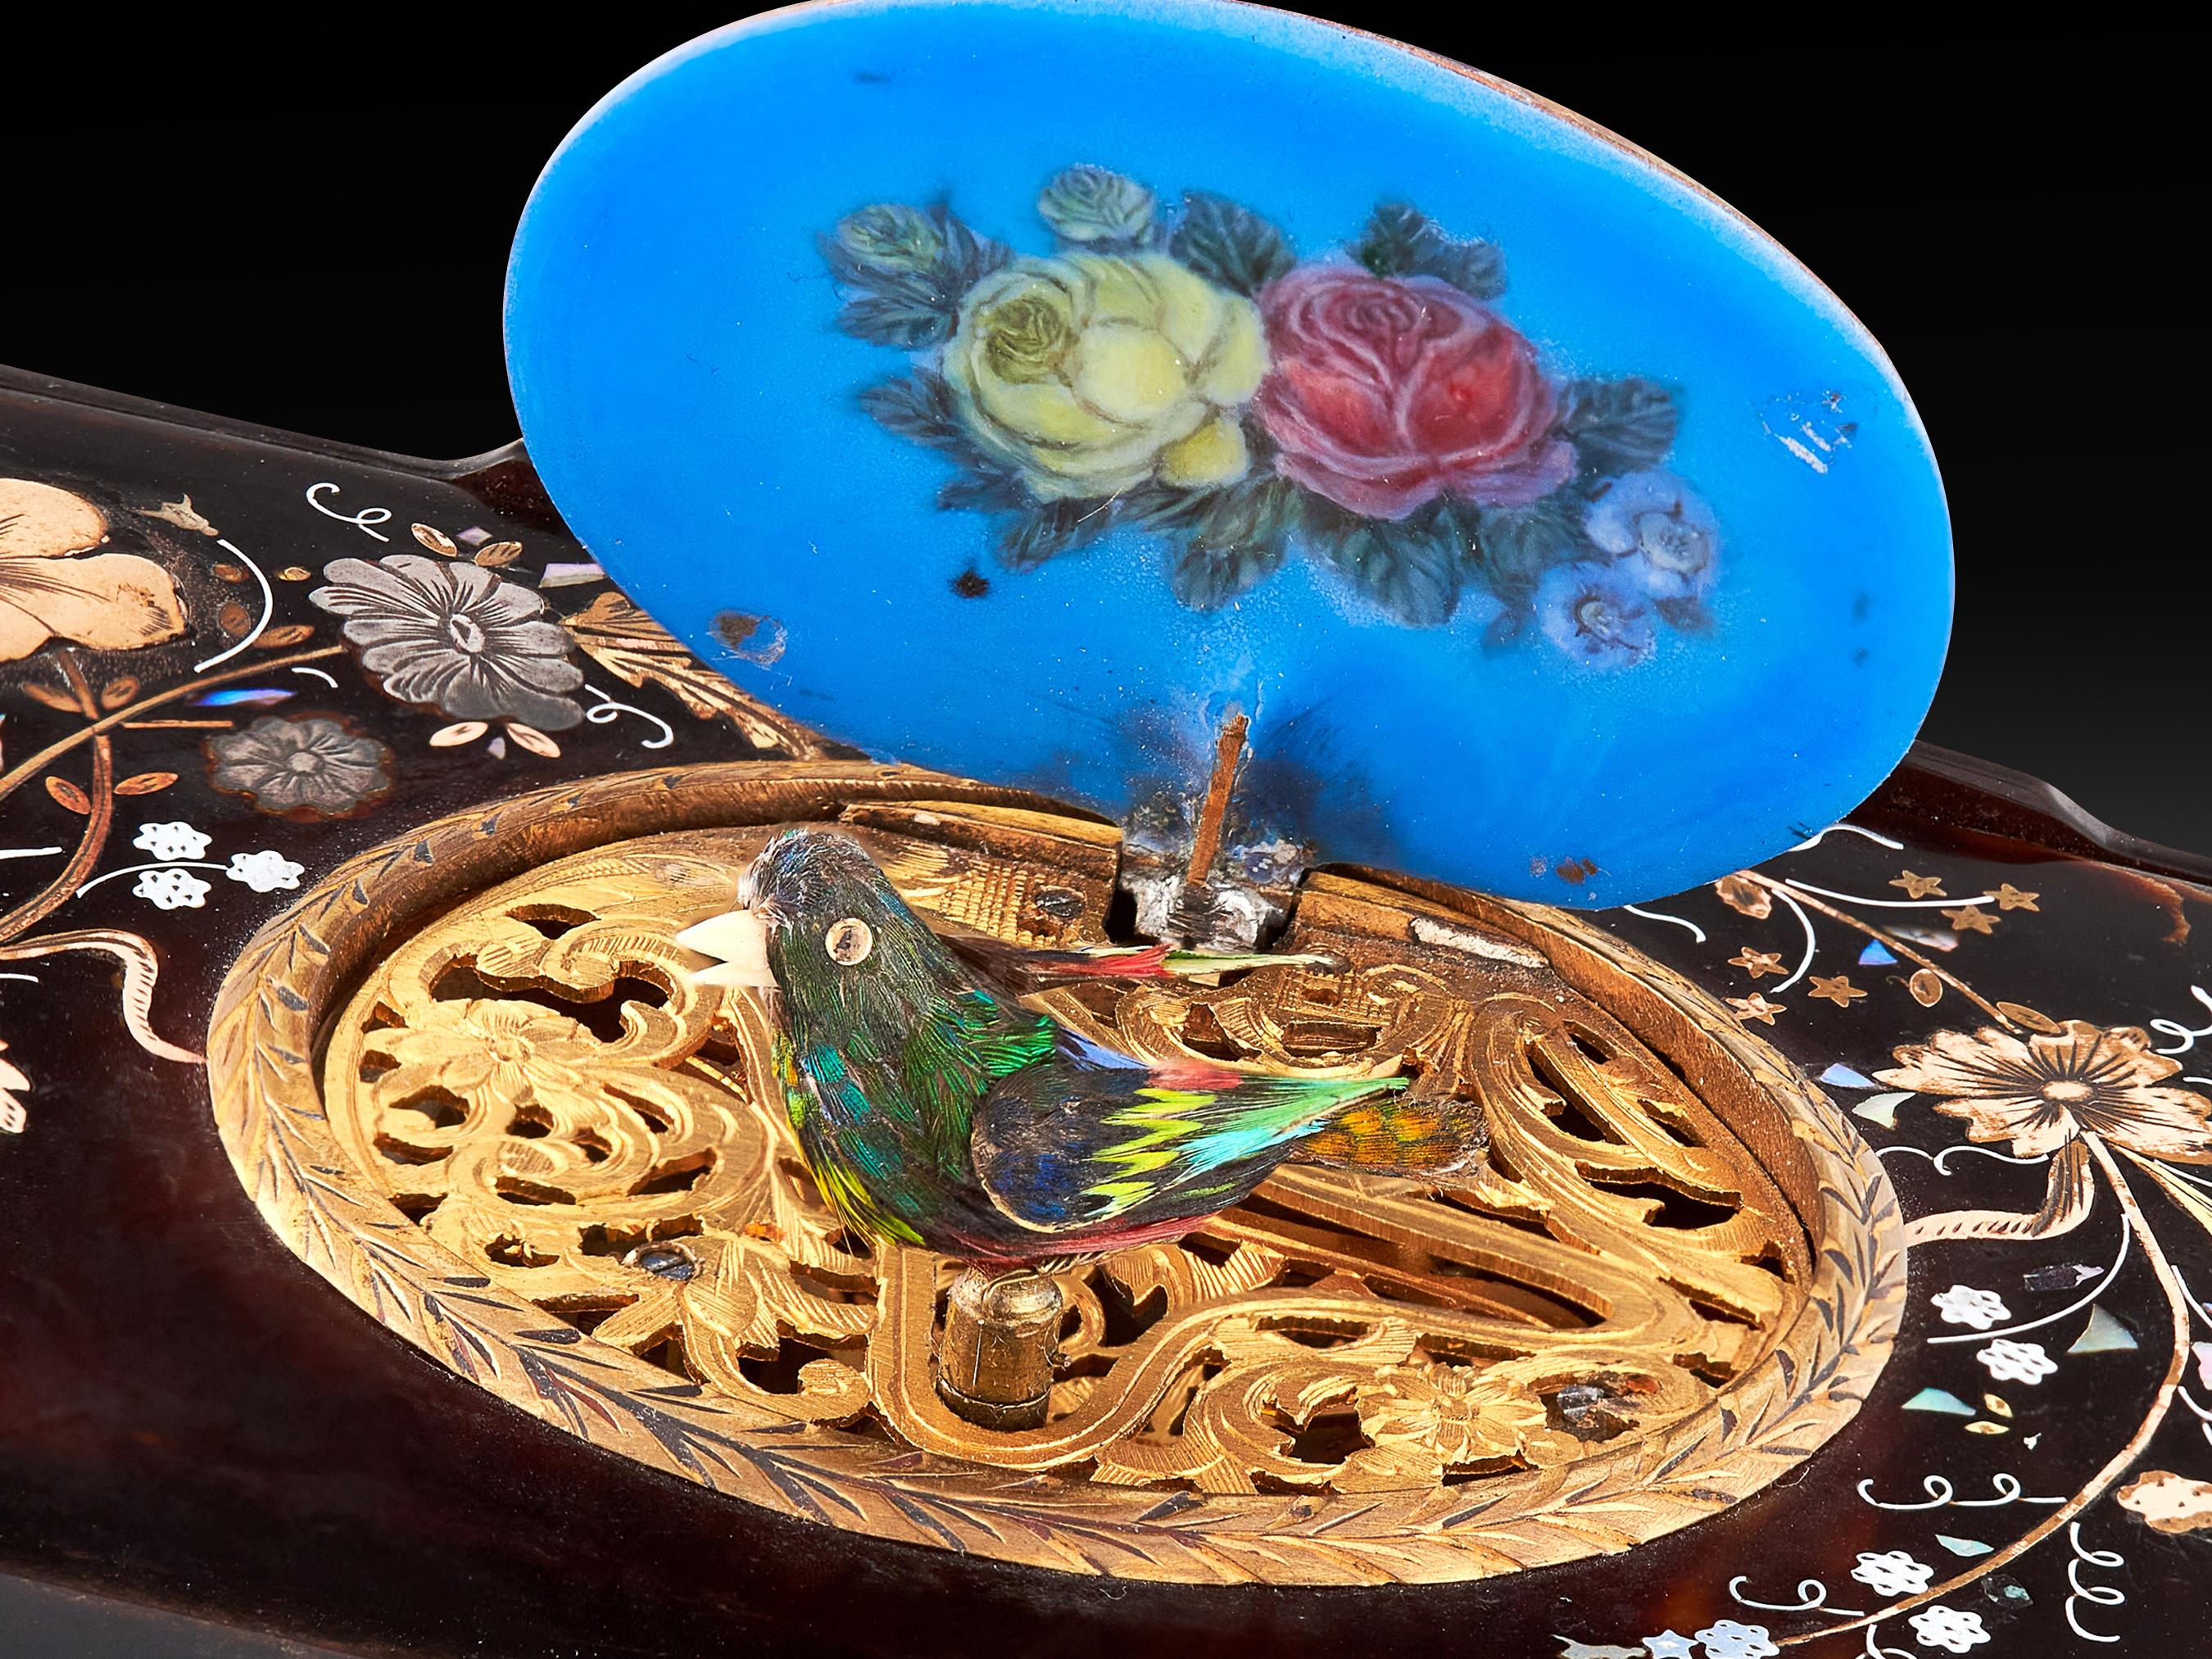 Romantic Incredibly Rare & Exquisite Singing Bird Box Inspired by Charles Bruguier For Sale